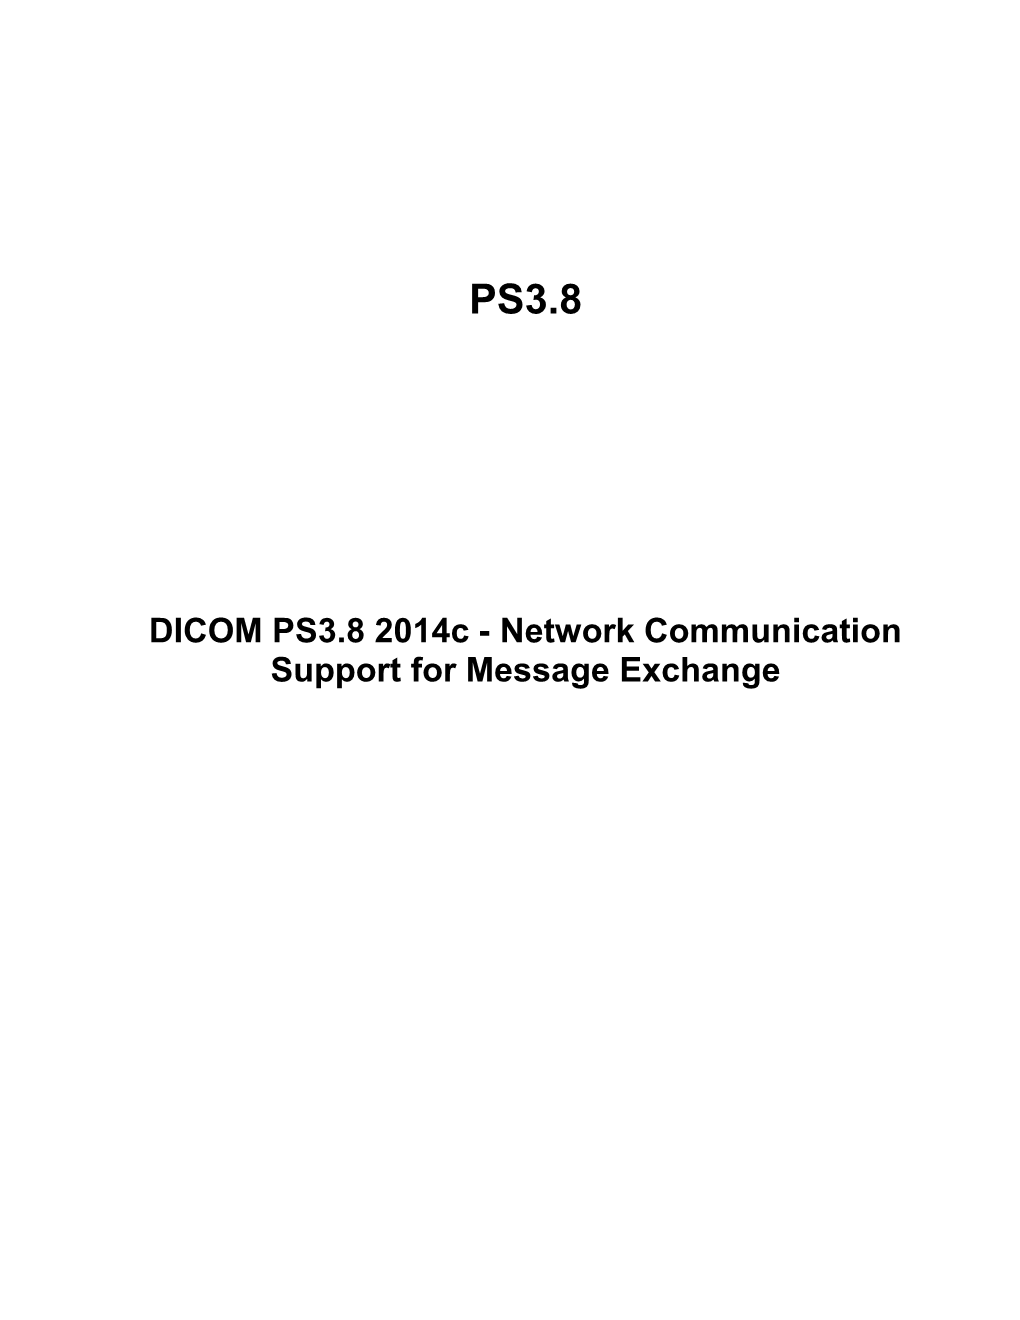 DICOM PS3.8 2014C - Network Communication Support for Message Exchange